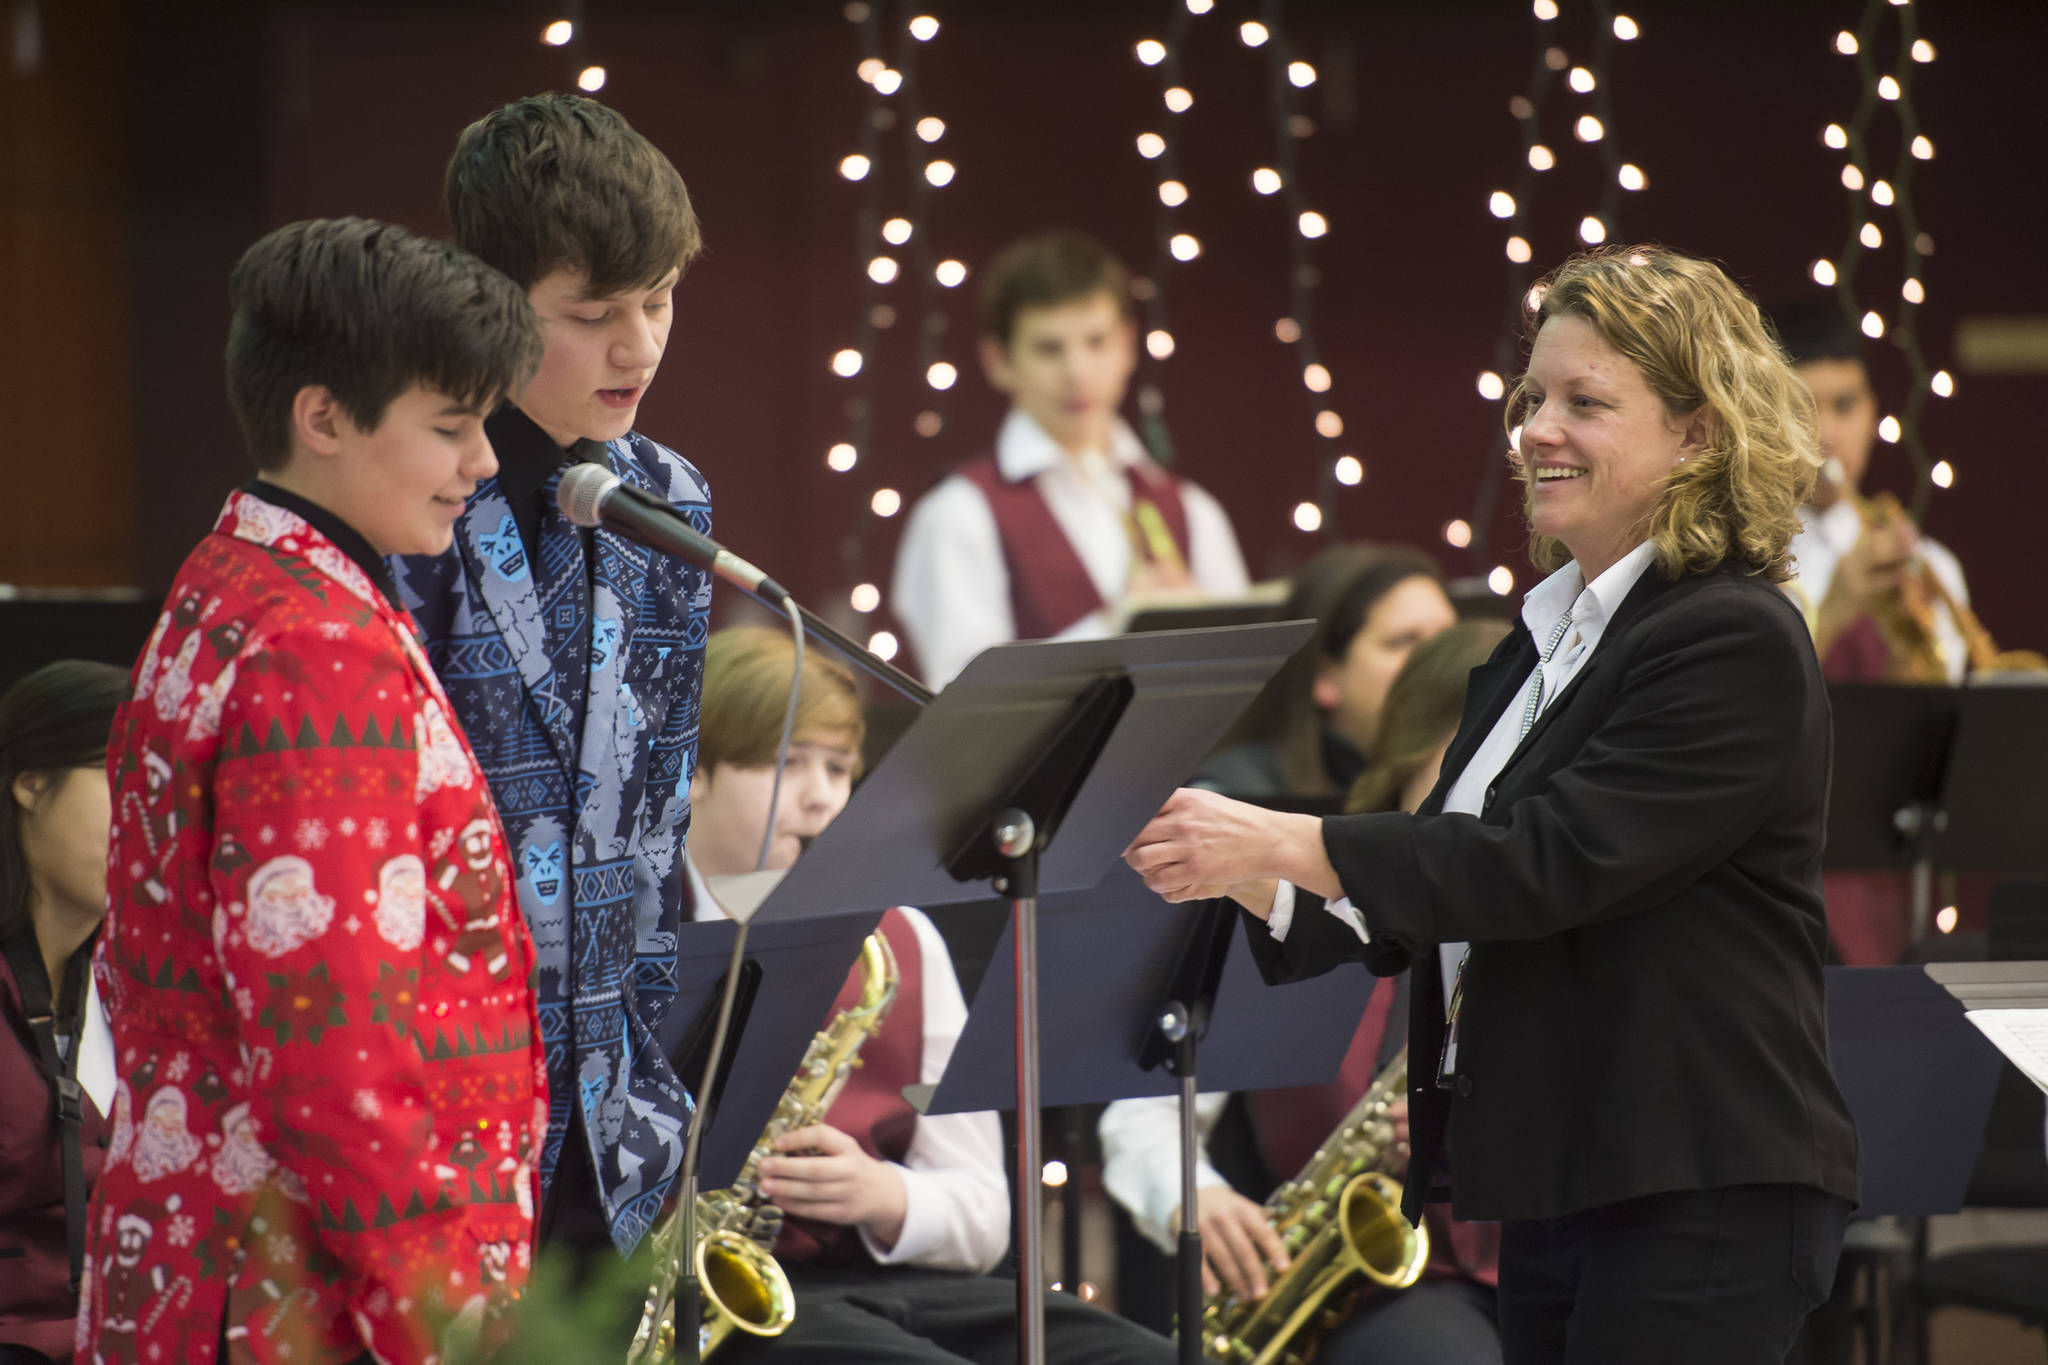 Band Director Amy Bibb adjusts the microphone as freshman Toby Russell, left, and senior Dakota Morgan sing with the Juneau-Douglas High School Jazz Band during a holiday music concert at JDHS on Thursday, Dec. 13, 2018. (Michael Penn | Juneau Empire)